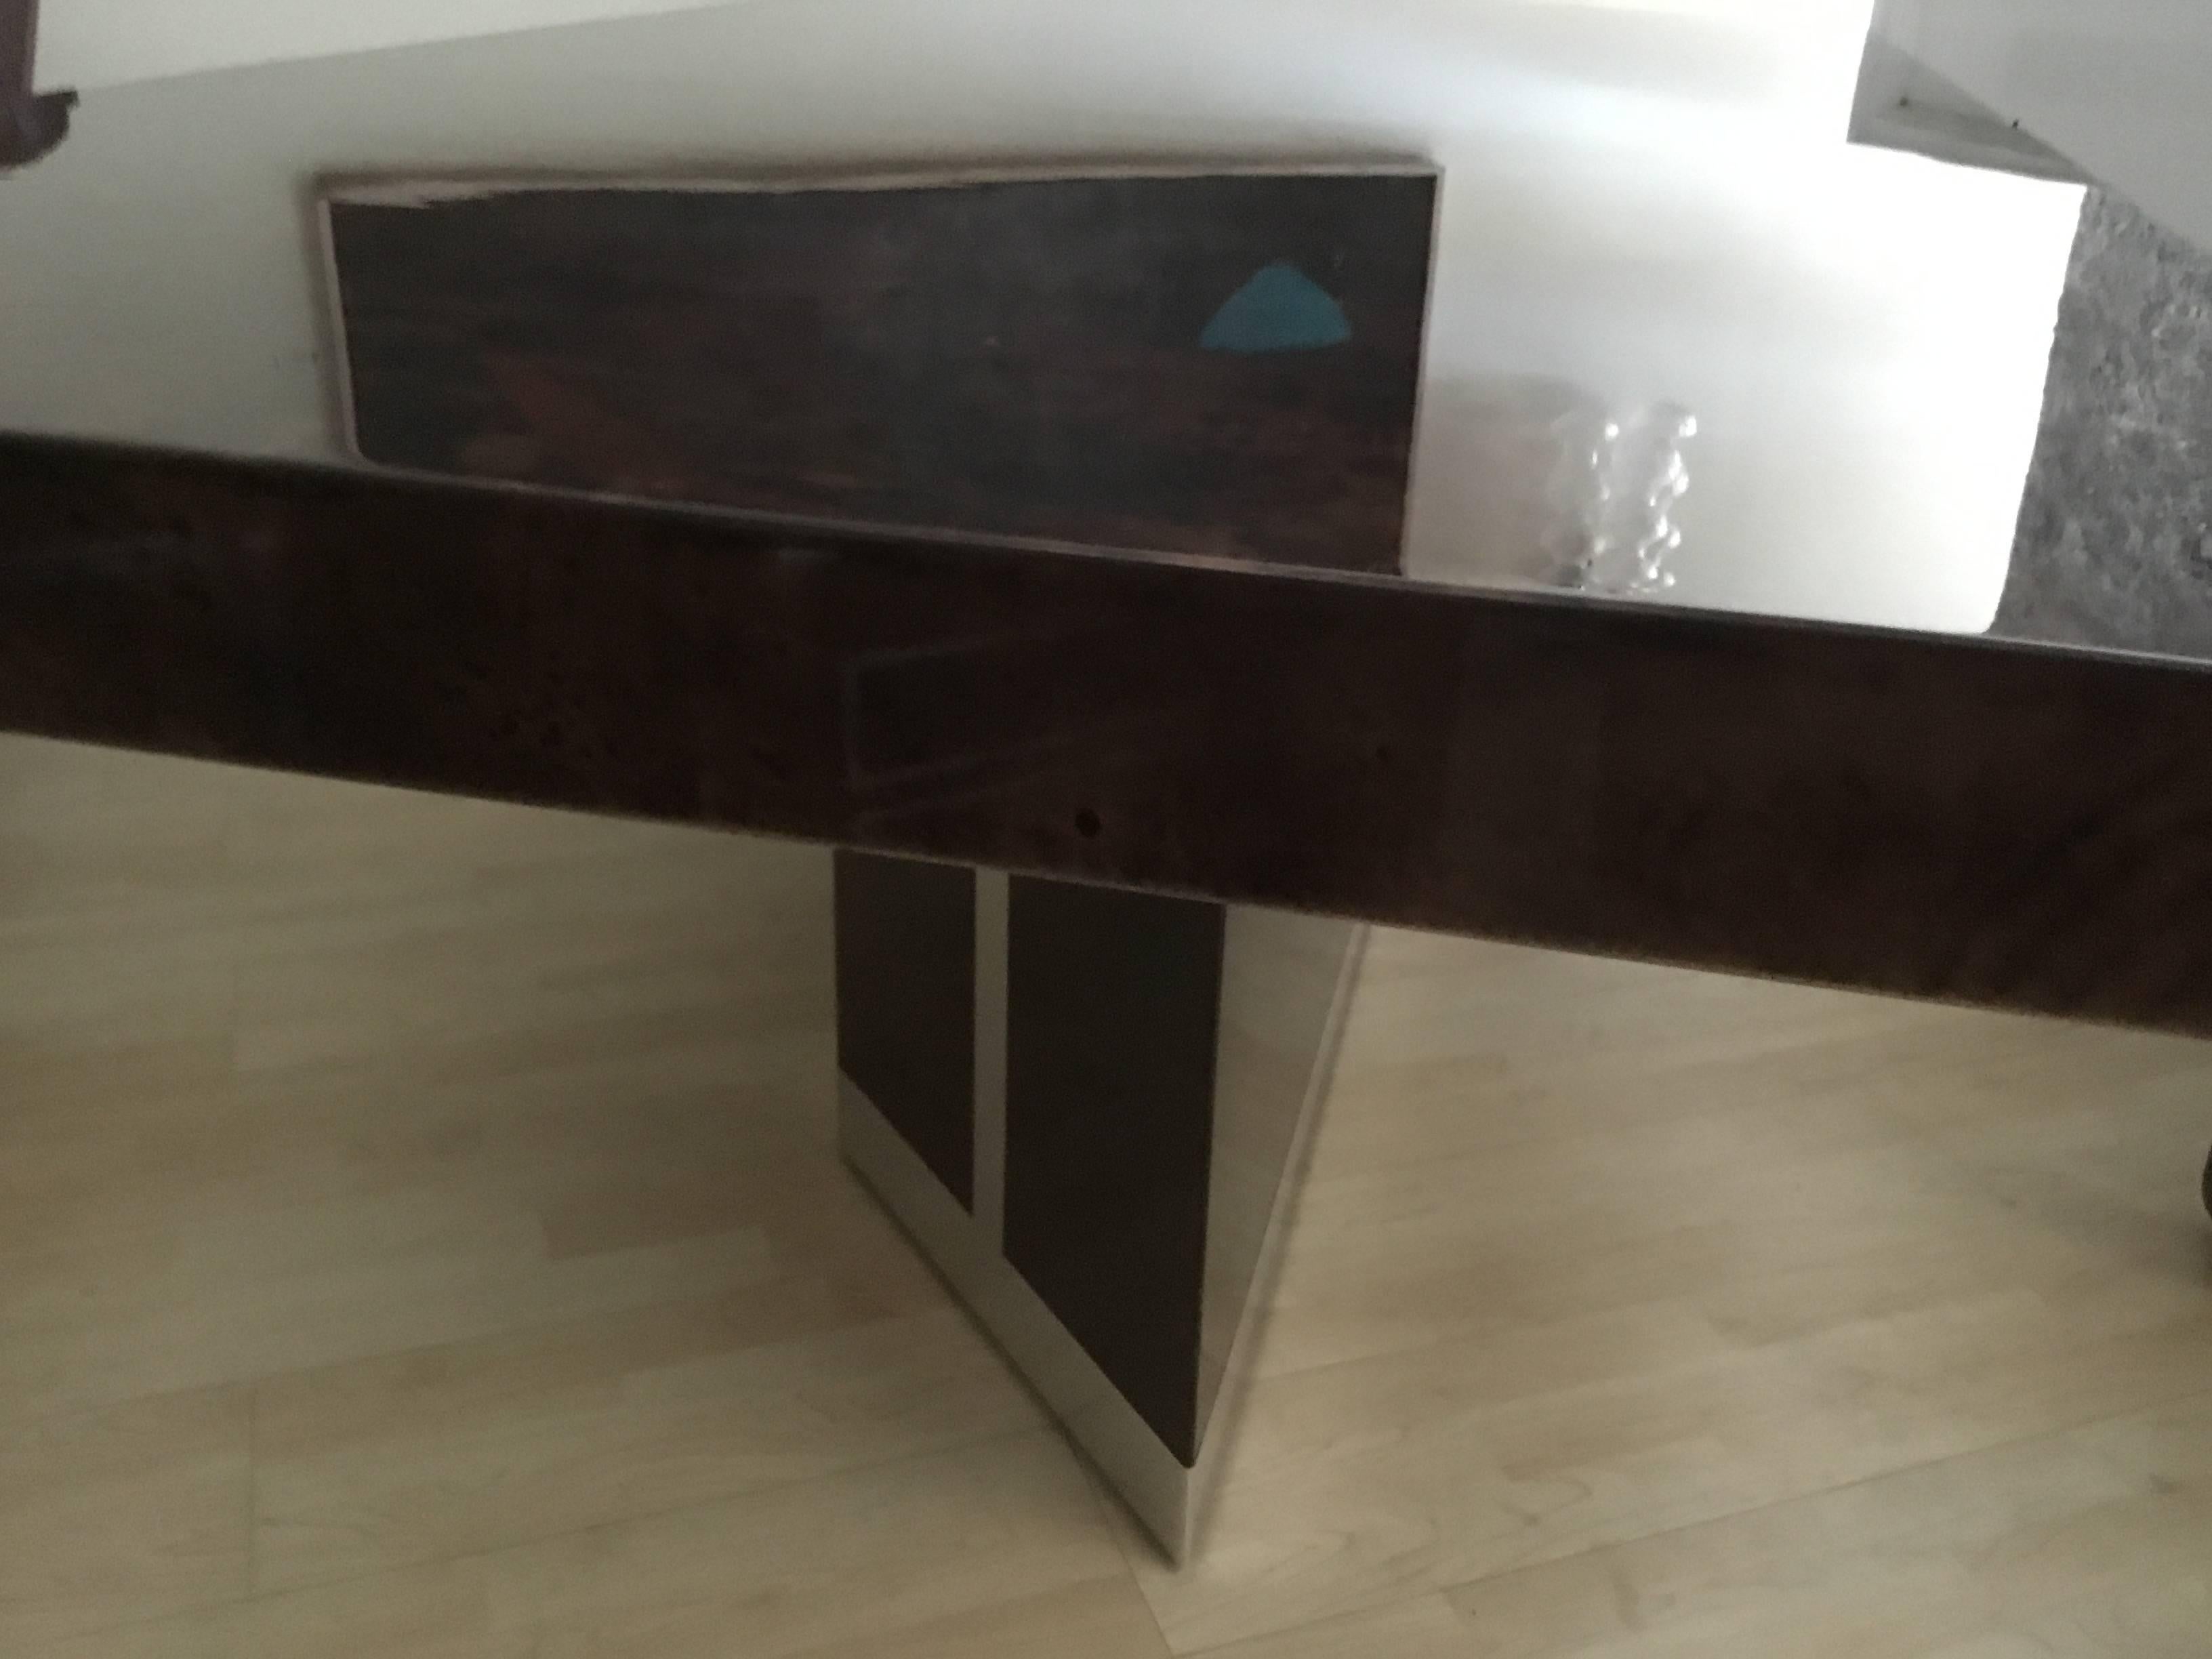 The finish is original with only one small repair. The table is a rich cognac or chocolate color. The steel banding is high polished. It is in great condition.